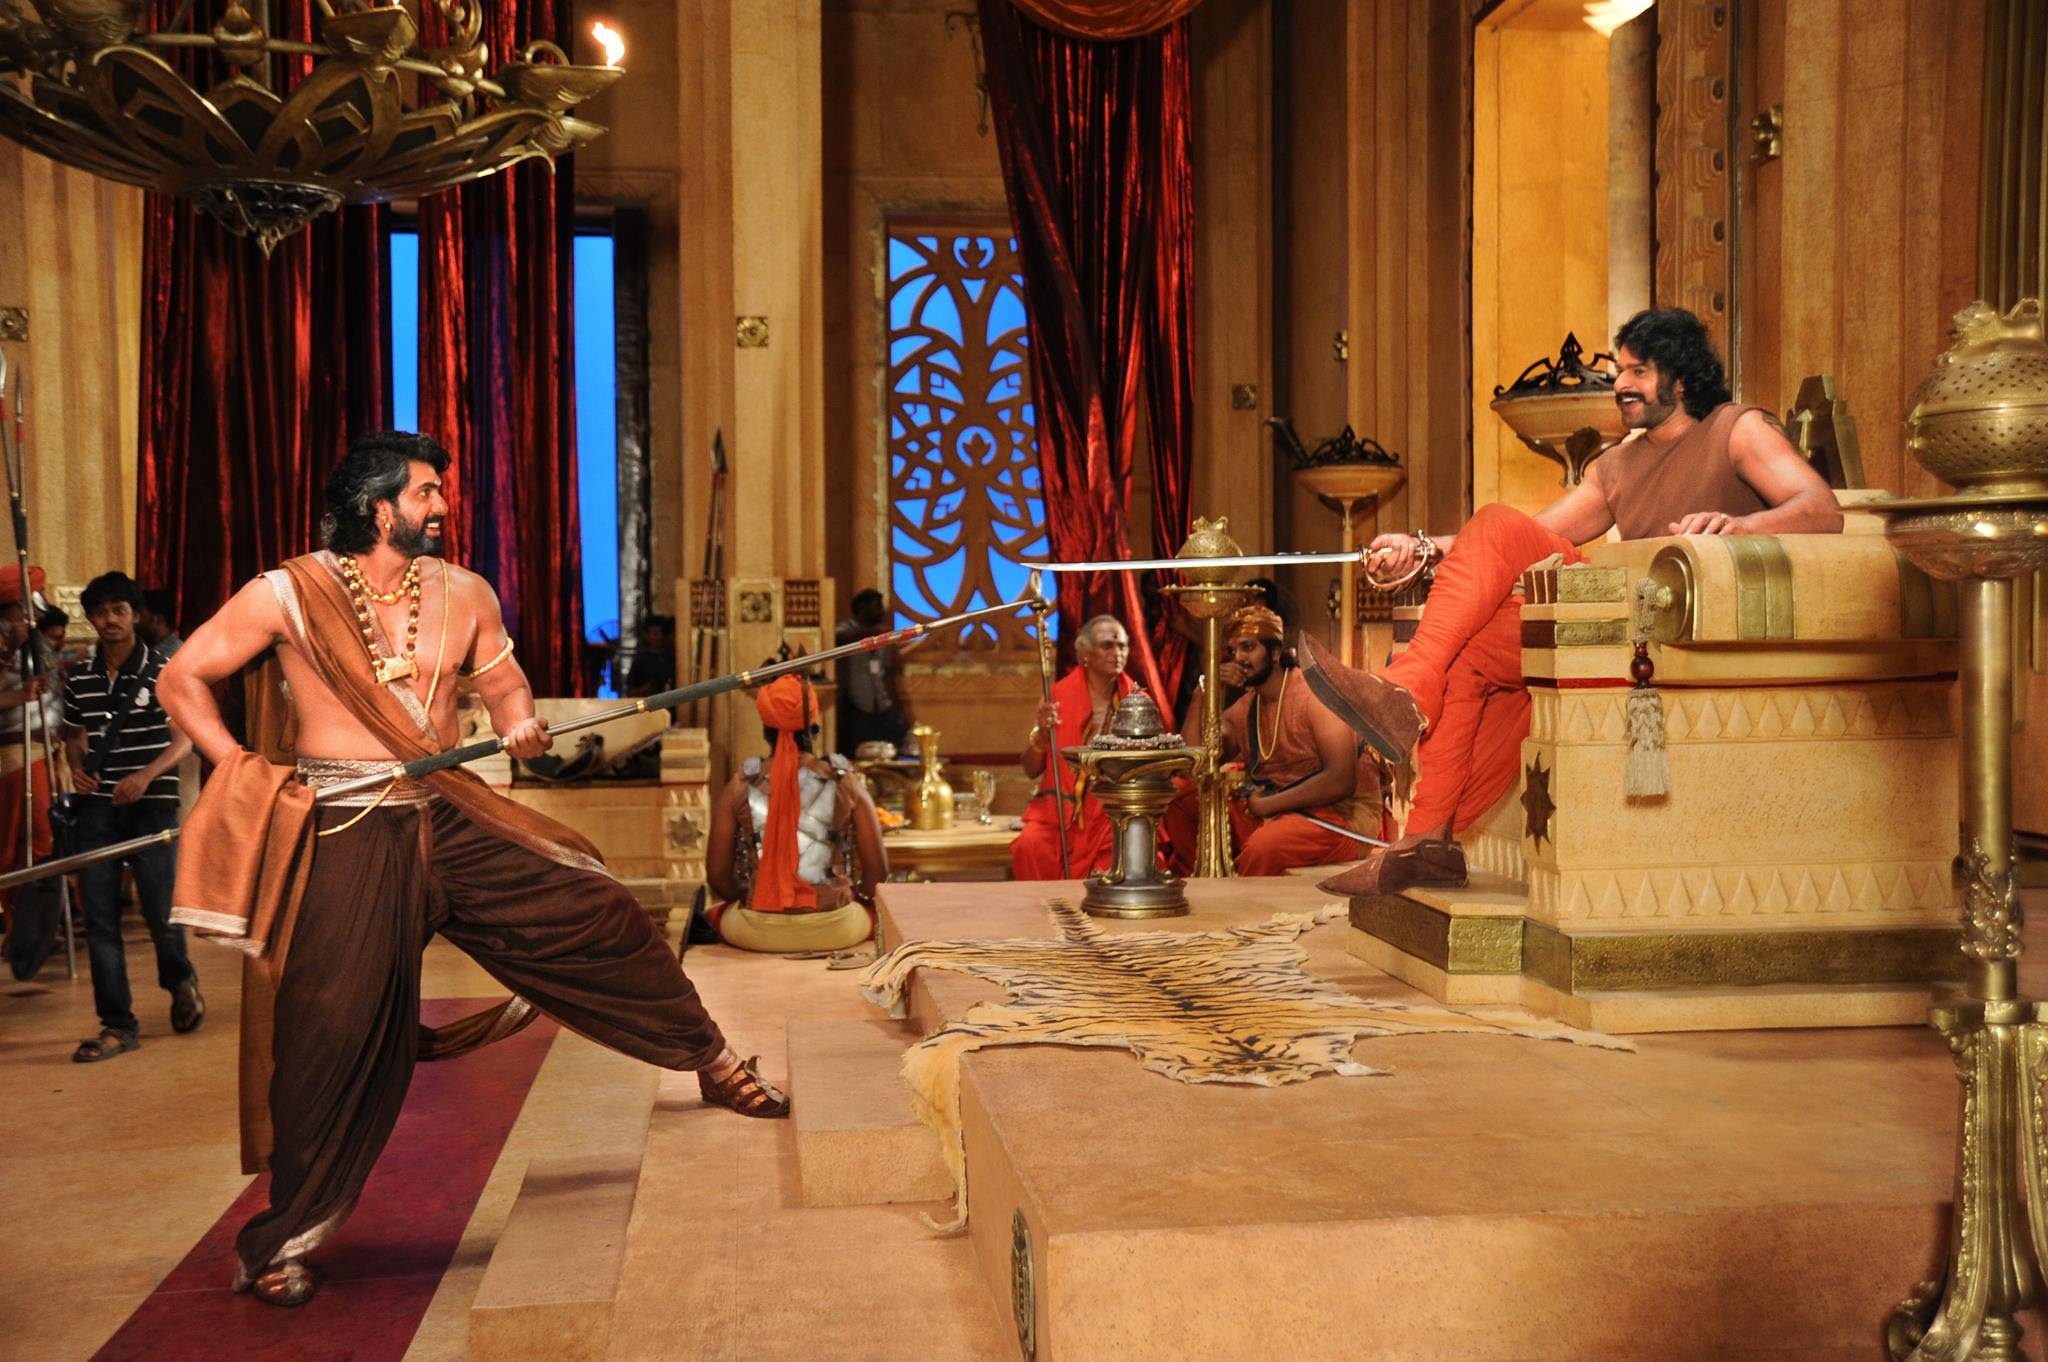 A still from the making video of 'Baahubali: The Conclusion' (Courtesy of YouTube)